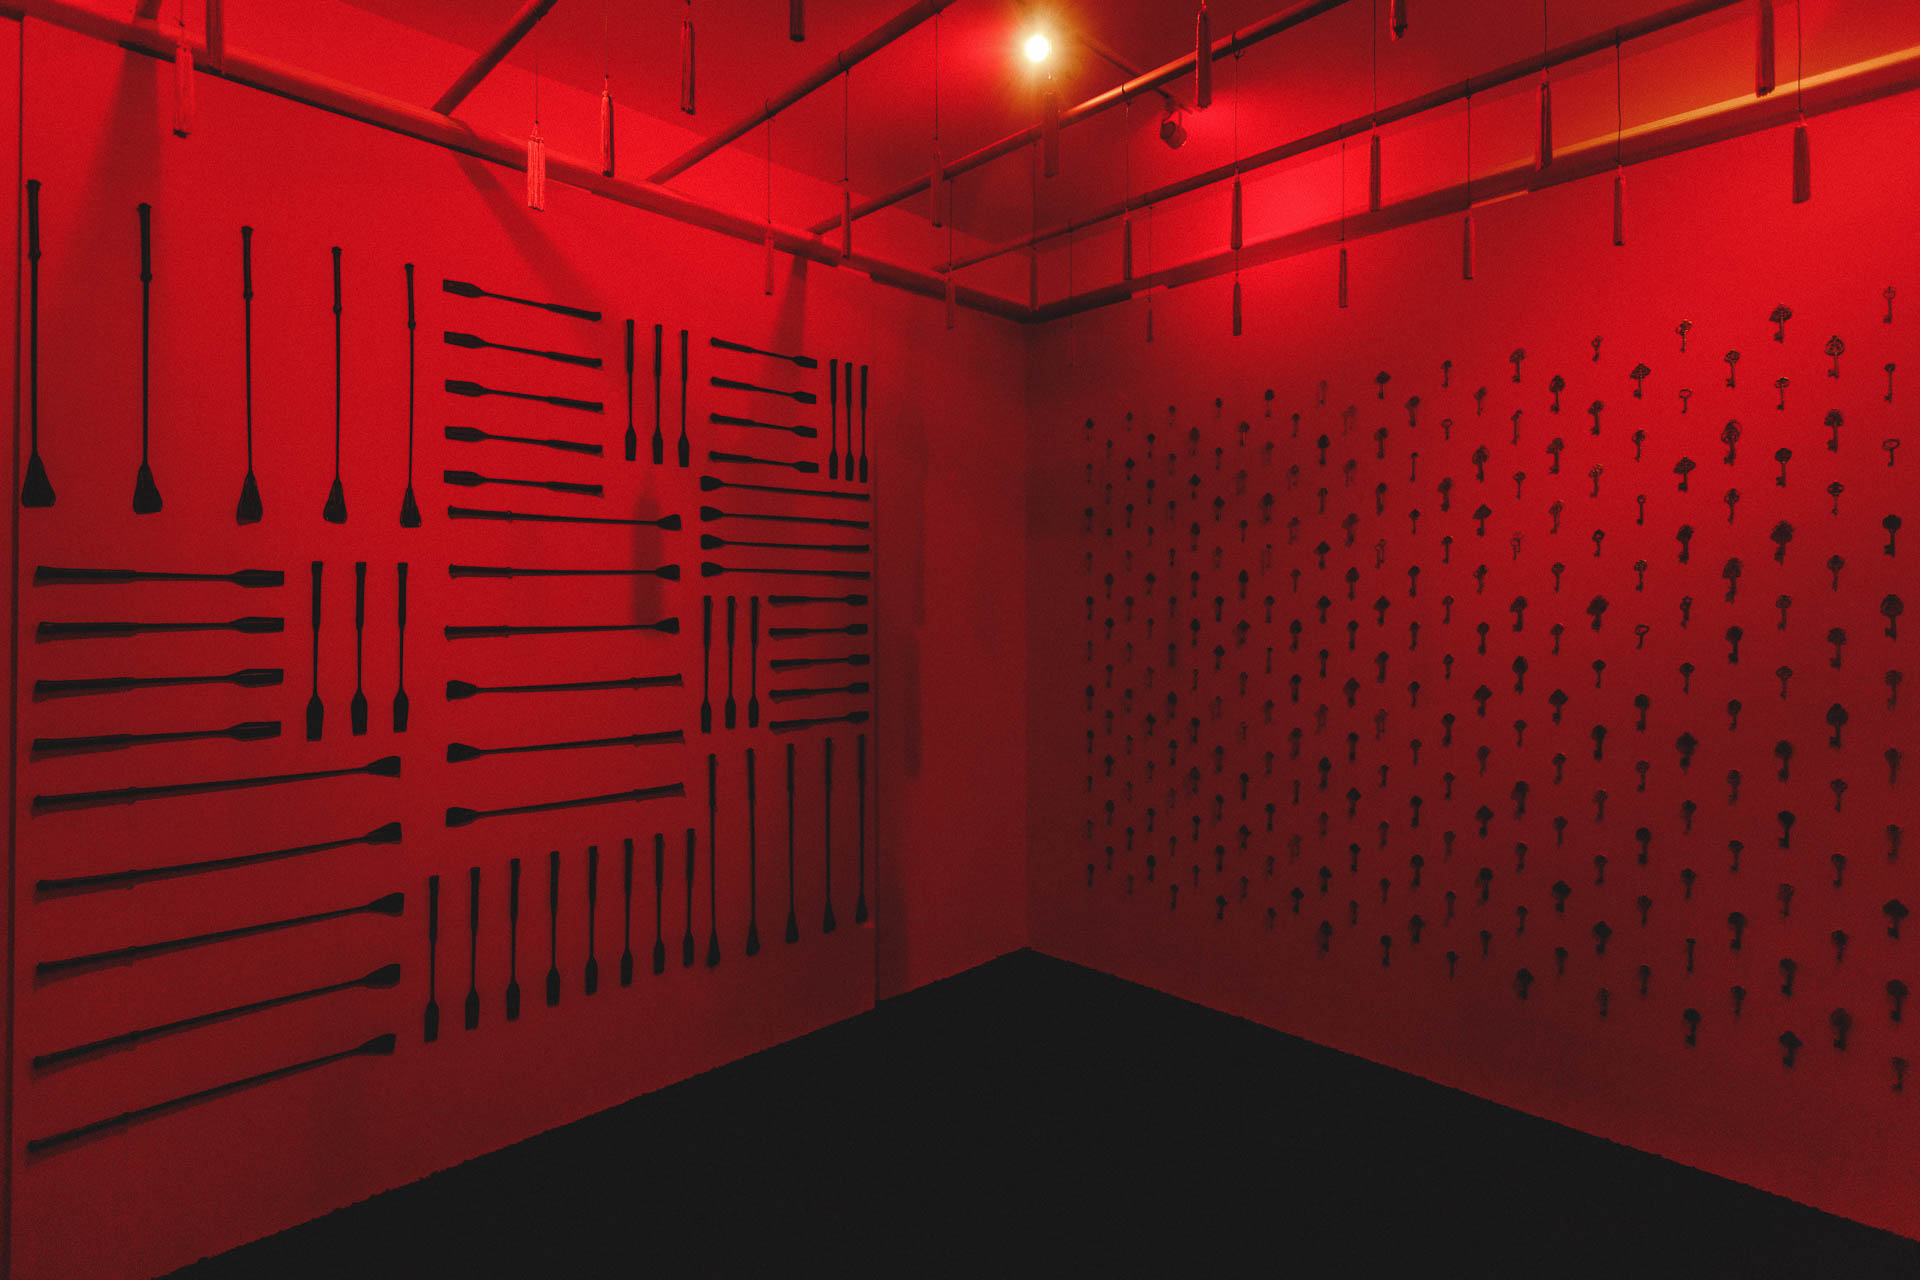 red room experience for 50 shades